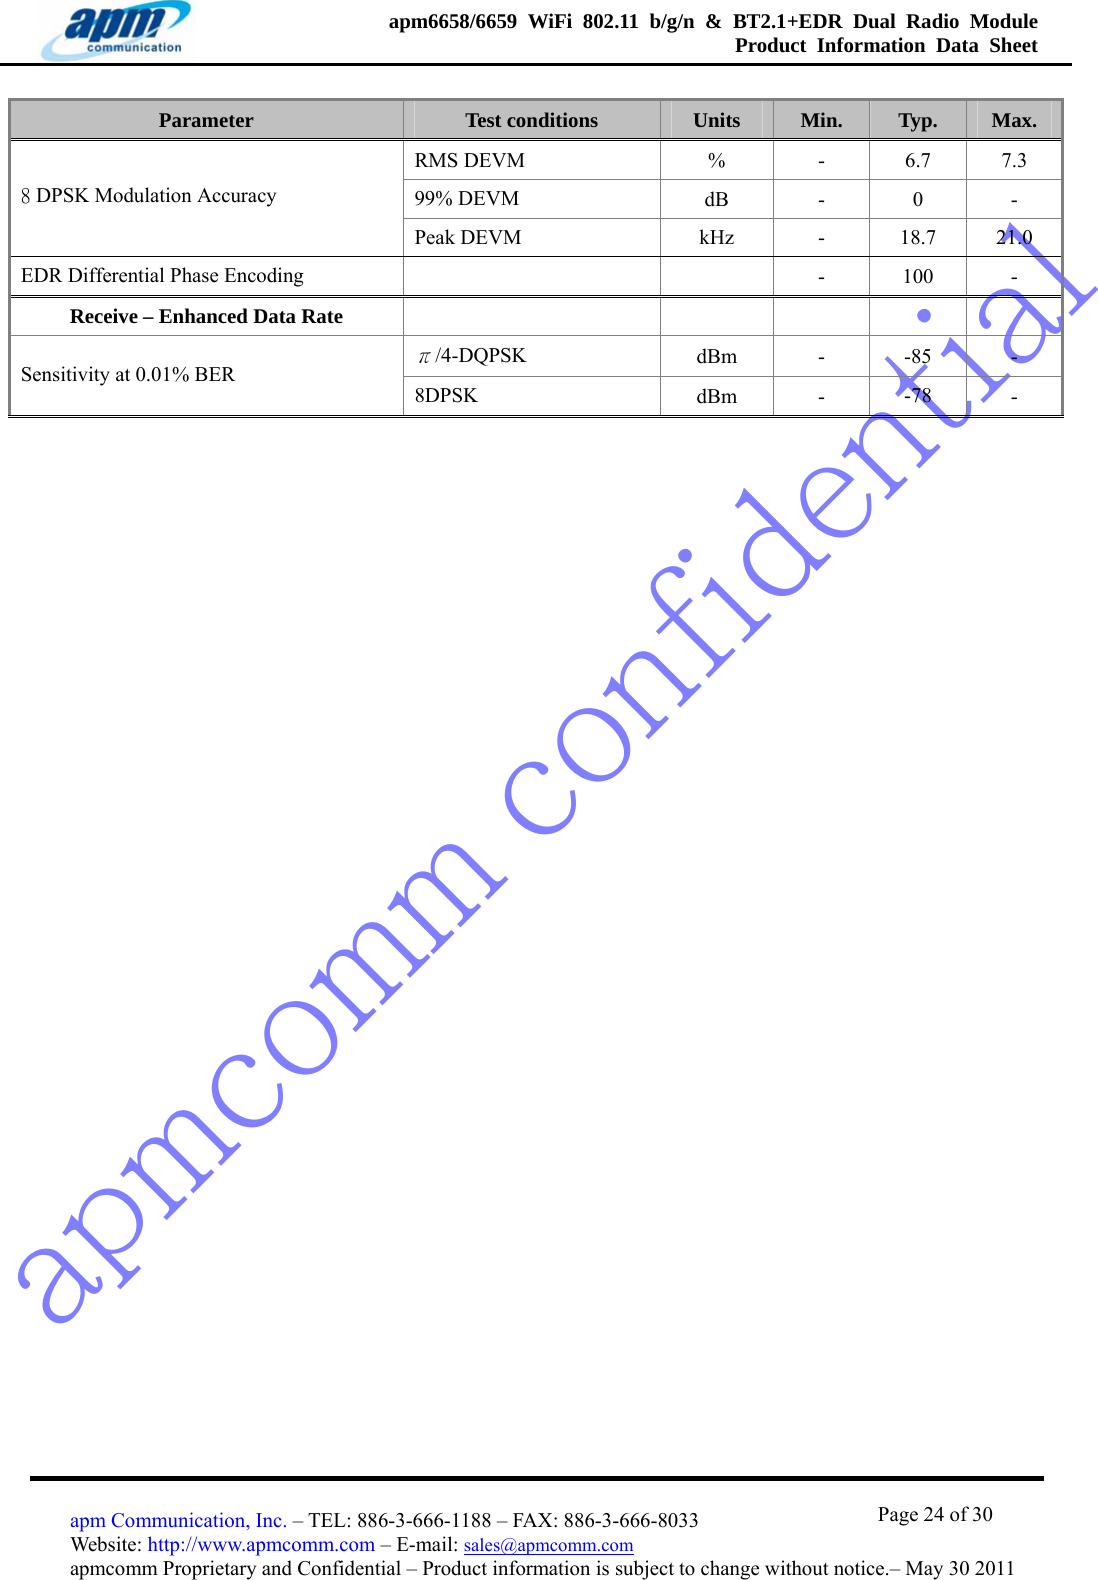 apmcomm confidentialapm6658/6659 WiFi 802.11 b/g/n &amp; BT2.1+EDR Dual Radio Module  Product Information Data Sheet                                       Page 24 of 30 apm Communication, Inc. – TEL: 886-3-666-1188 – FAX: 886-3-666-8033 Website: http://www.apmcomm.com – E-mail: sales@apmcomm.com  apmcomm Proprietary and Confidential – Product information is subject to change without notice.– May 30 2011 Parameter  Test conditions  Units  Min.  Typ.  Max. RMS DEVM  % - 6.7 7.3 99% DEVM  dB - 0 - 8 DPSK Modulation Accuracy Peak DEVM  kHz - 18.7 21.0 EDR Differential Phase Encoding       - 100 - Receive – Enhanced Data Rate      π/4-DQPSK  dBm  - -85 - Sensitivity at 0.01% BER 8DPSK   dBm - -78  - 